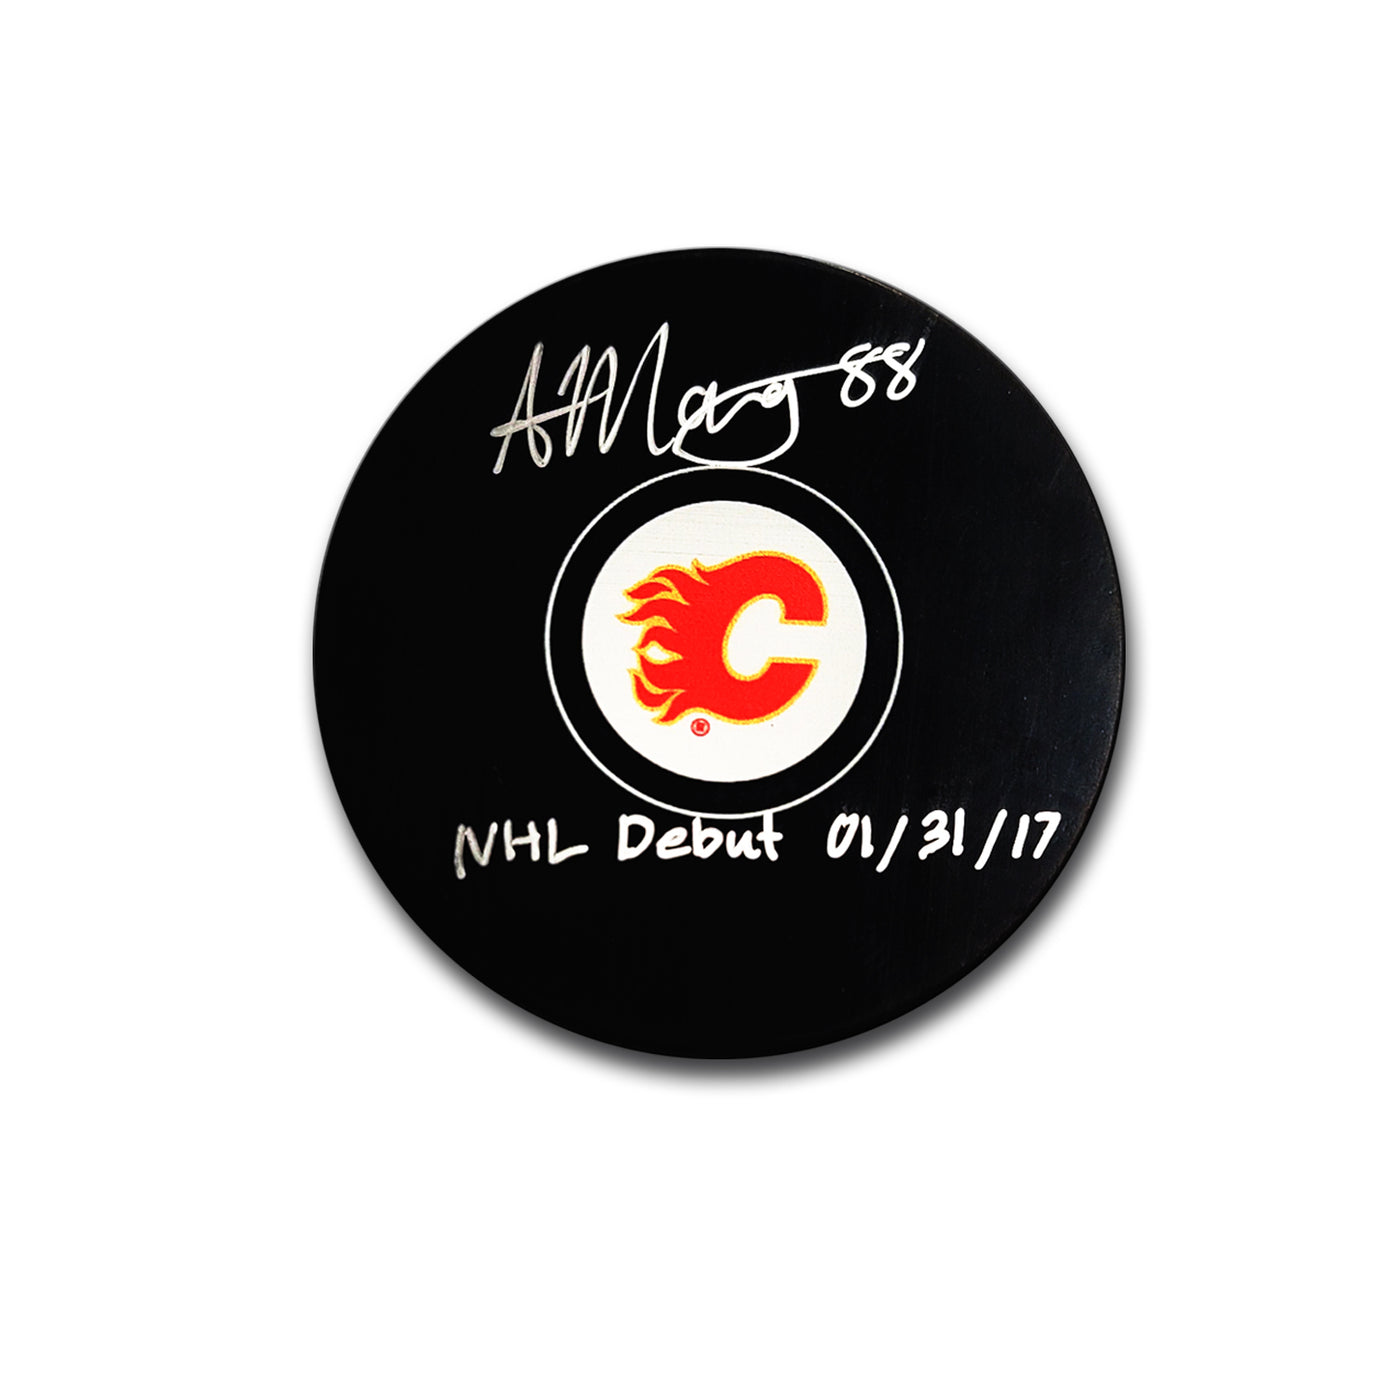 Andrew Mangiapane Calgary Flames Autographed Hockey Puck Inscribed NHL Debut 01/31/17